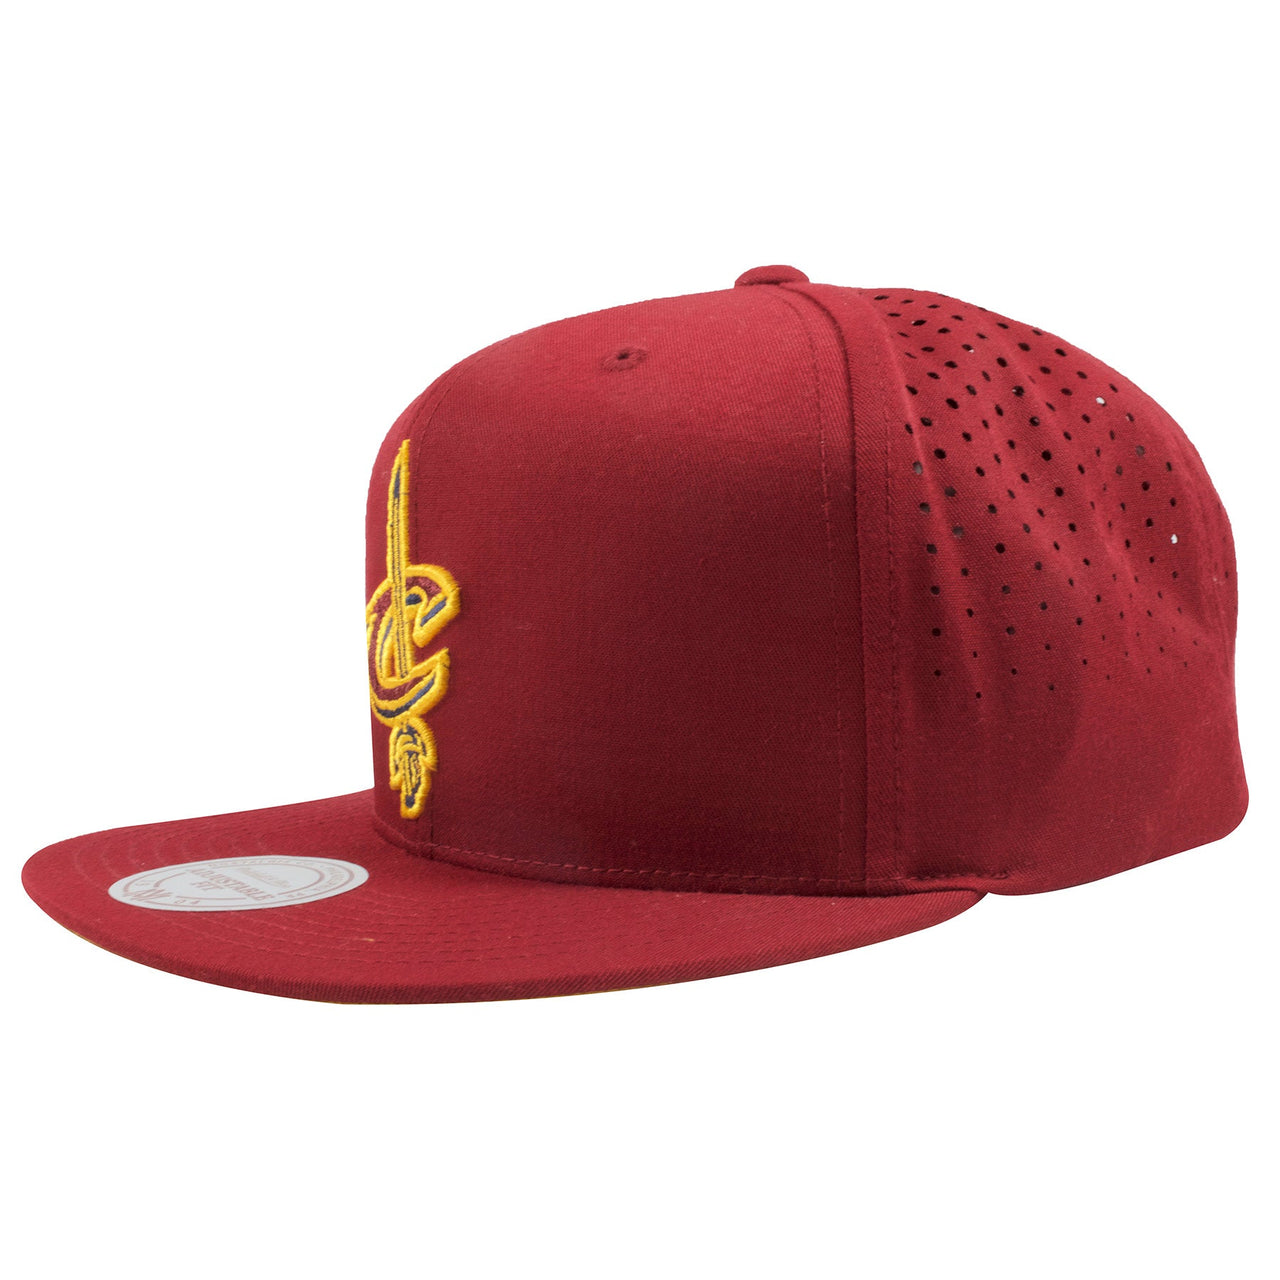 Cleveland Cavaliers Maroon Perforated Mesh Mitchell and Ness Snapback Hat